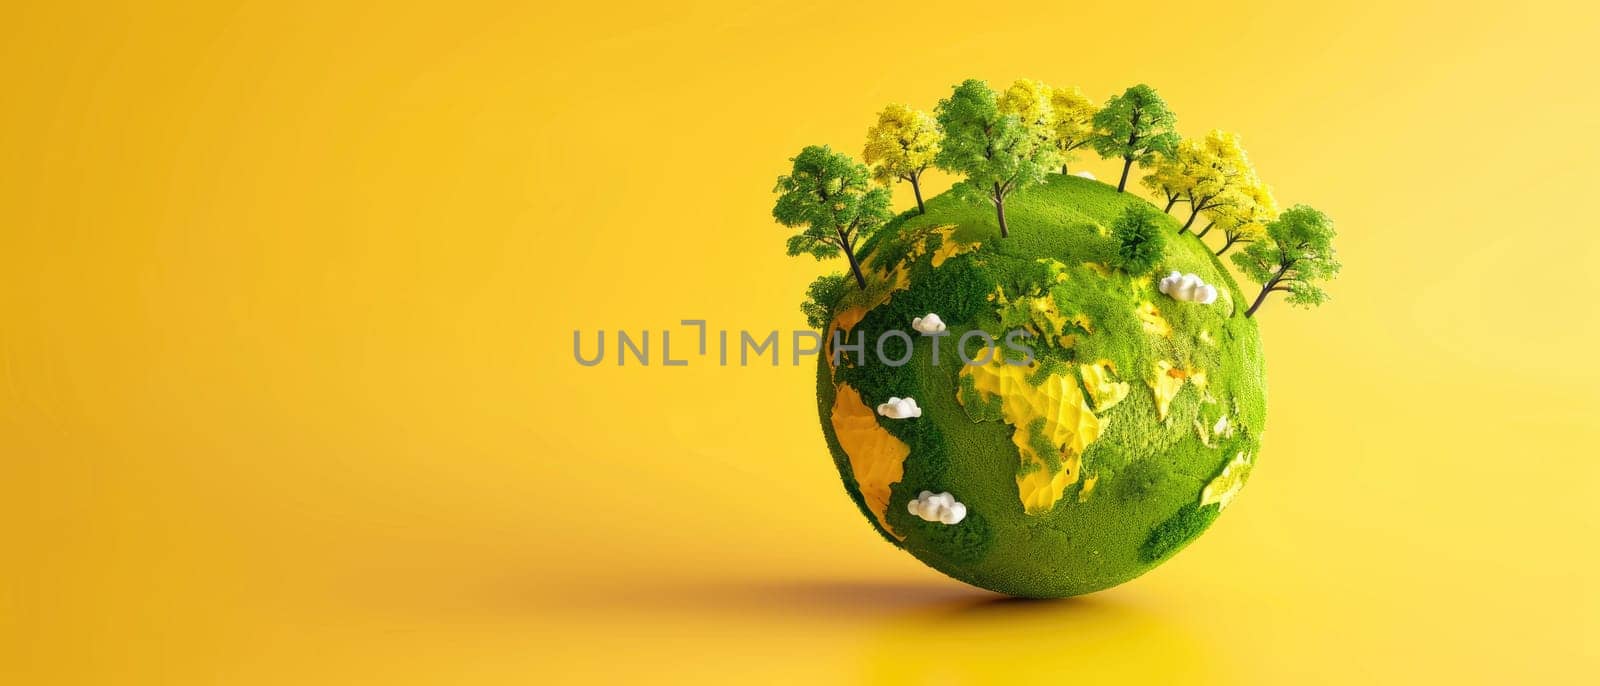 A green planet with trees and a yellow background by AI generated image.